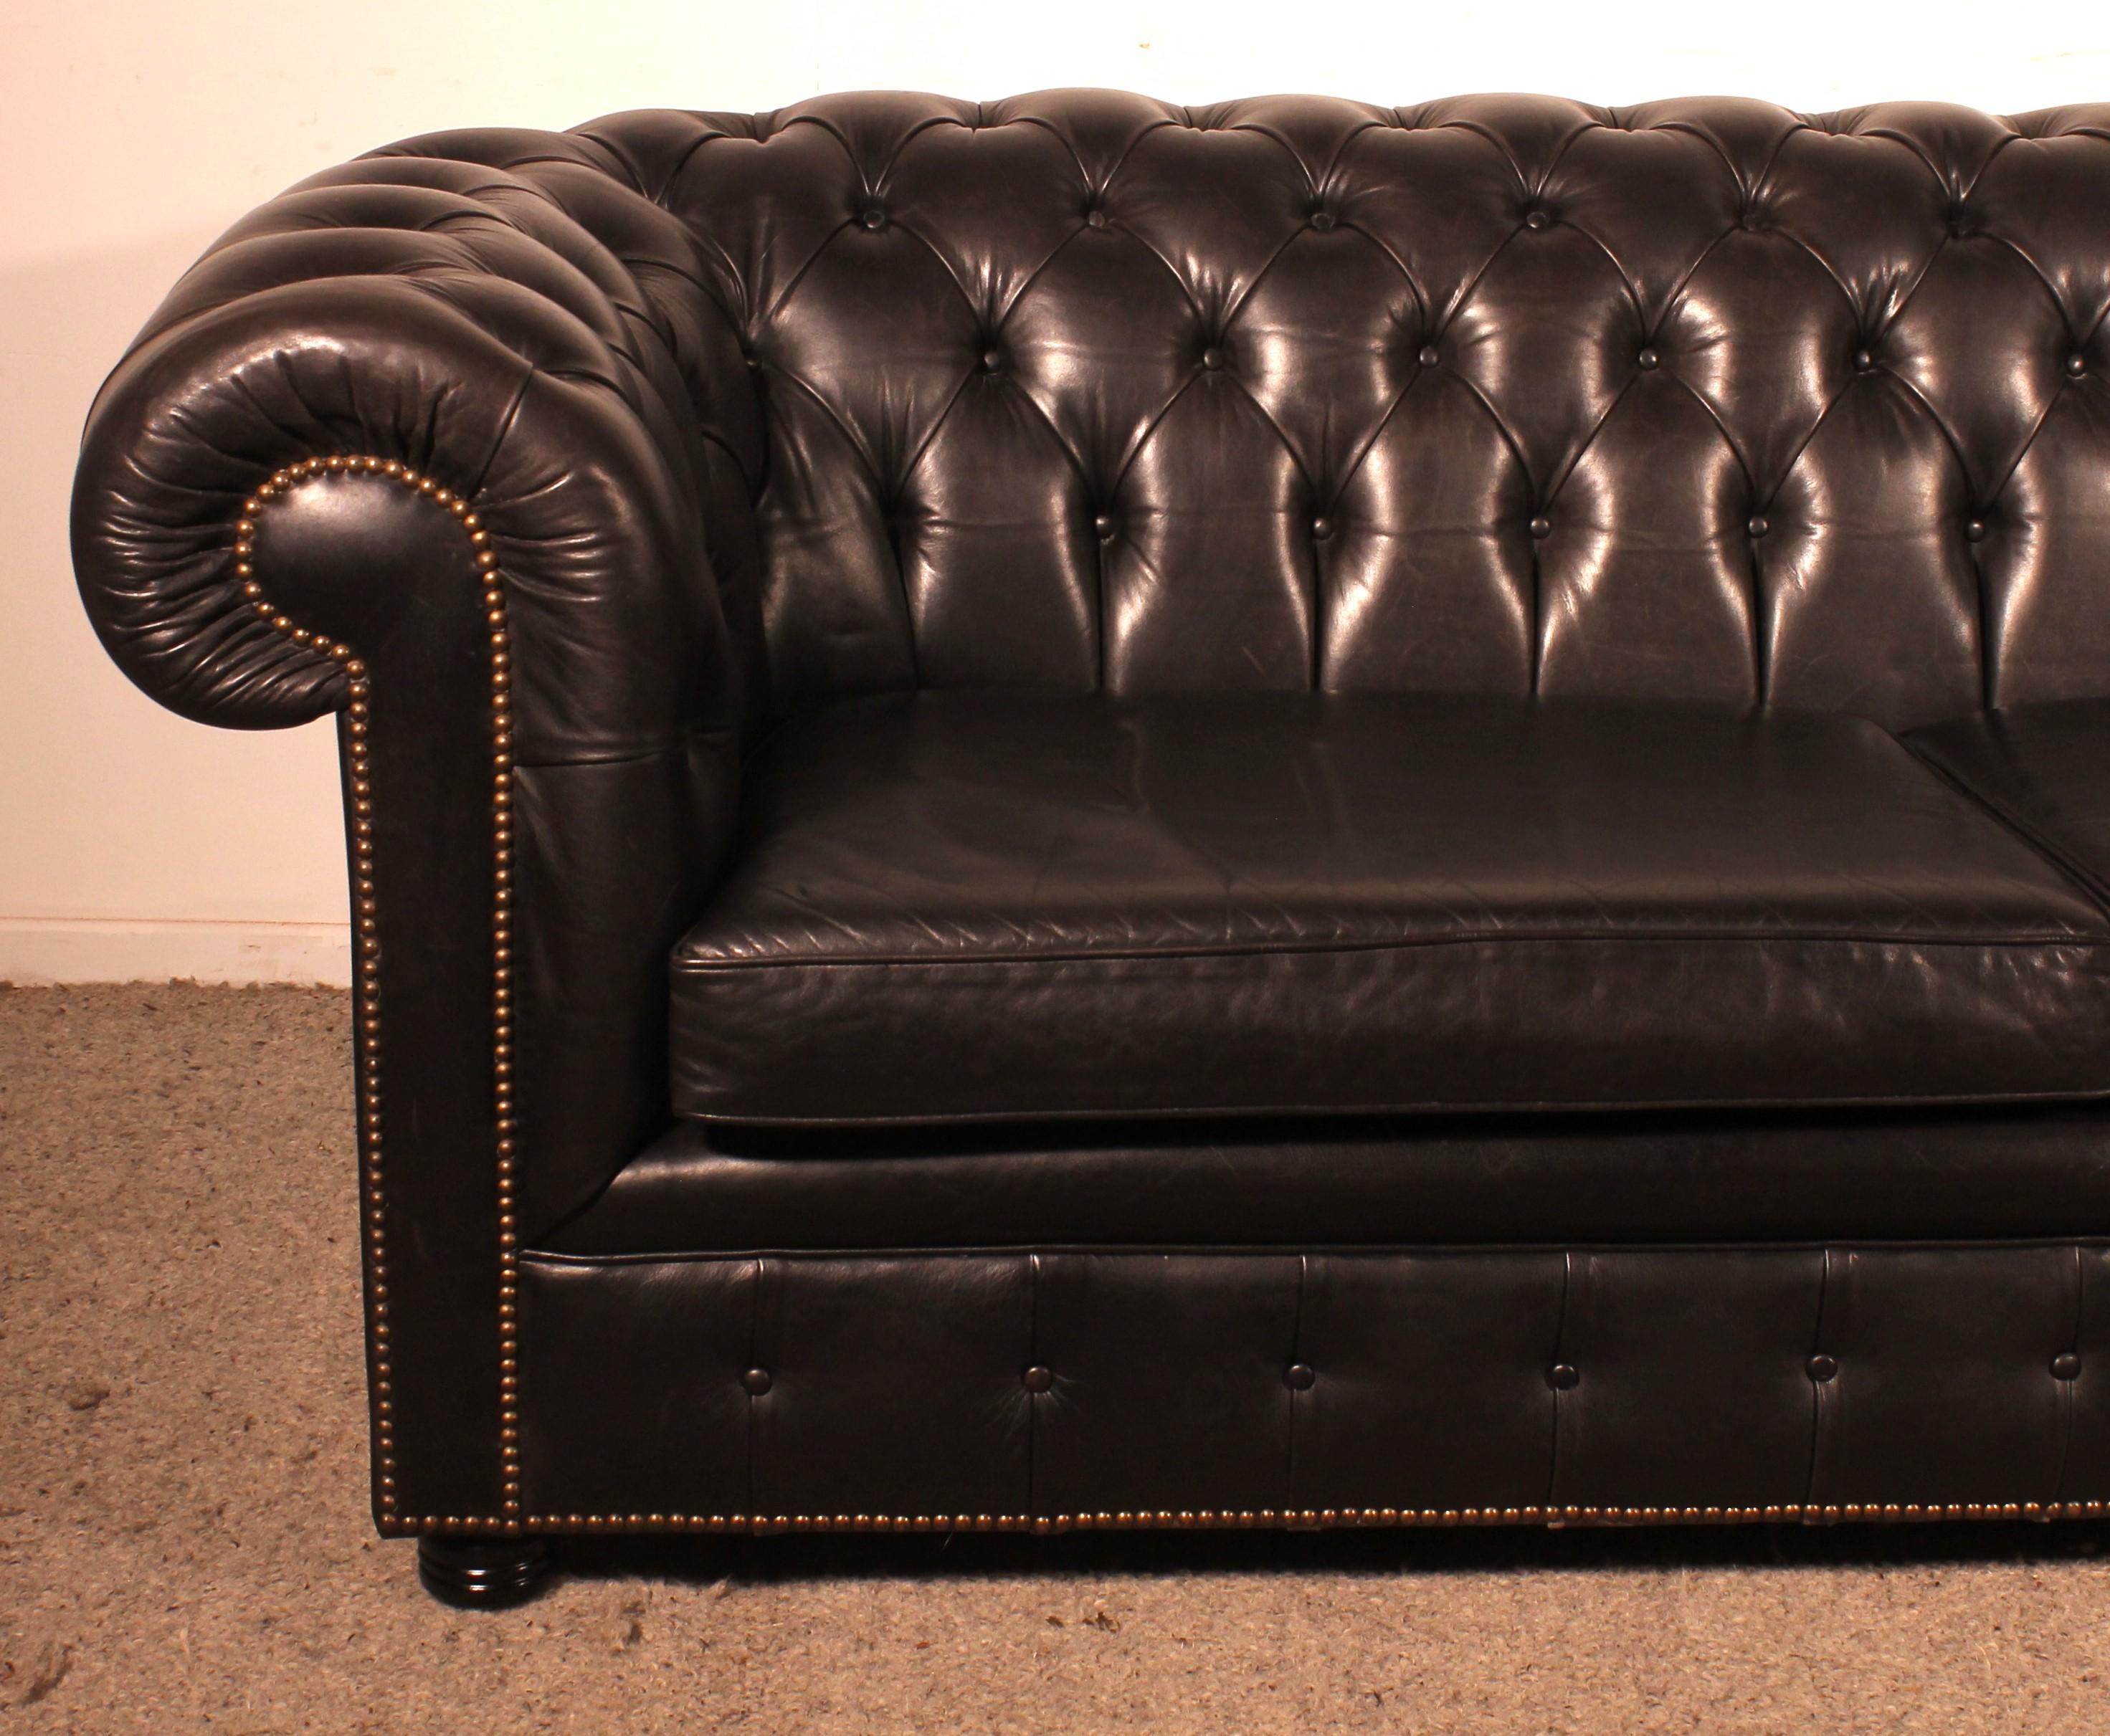 Superb chesterfield sofa in anthracite black leather from the 60s, made in England
Very beautiful sofa from the 60s made in England in Nothingham

Beautiful quality leather Sofa called chesterfield with  padded back
seat height of 44cm

Superb